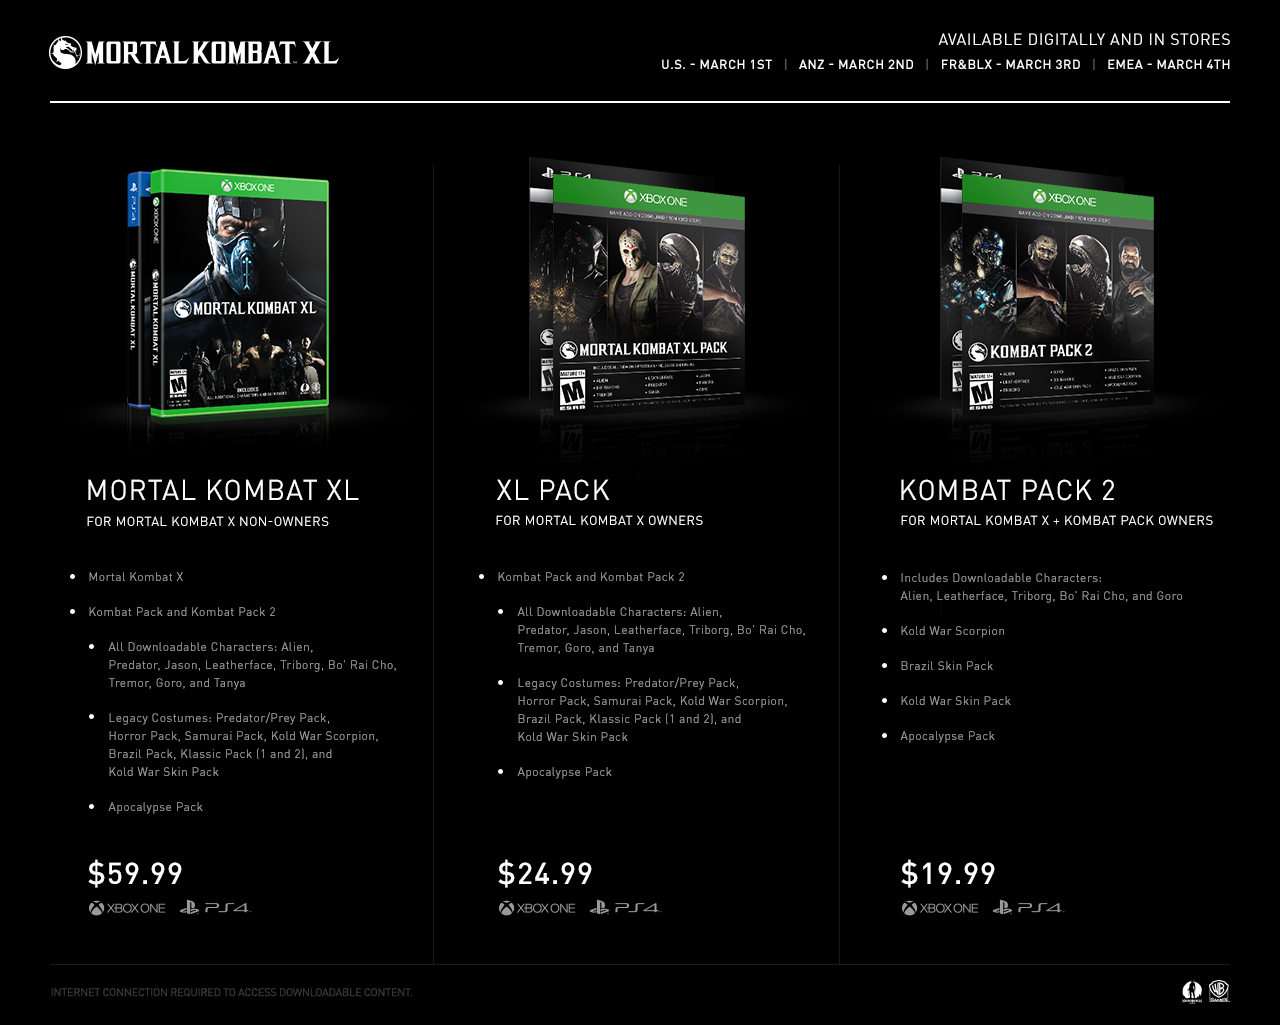 Prices for new additions Mortal Kombat X